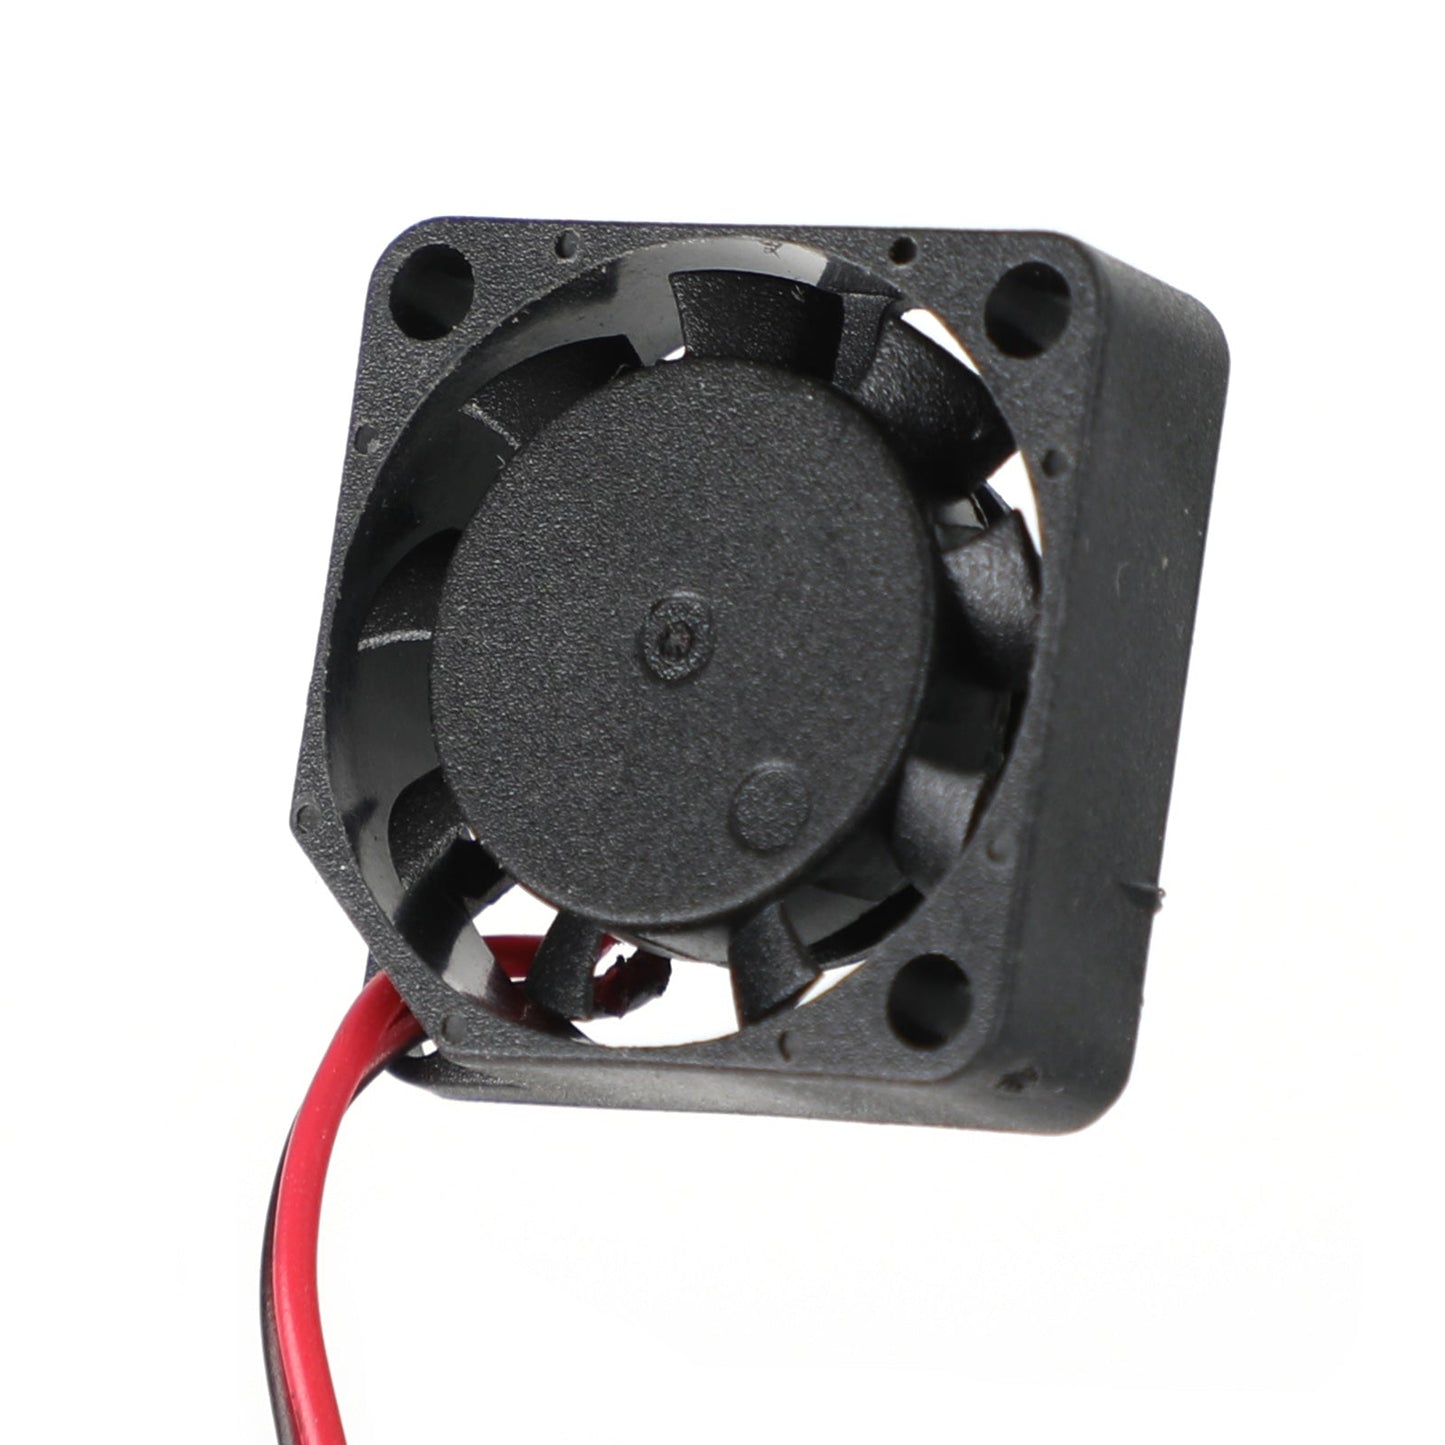 1Pc Brushless DC Cooling Blower Fan 12V 0.06A 2006 20x20x6mm Sleeve 2 Pin Wire